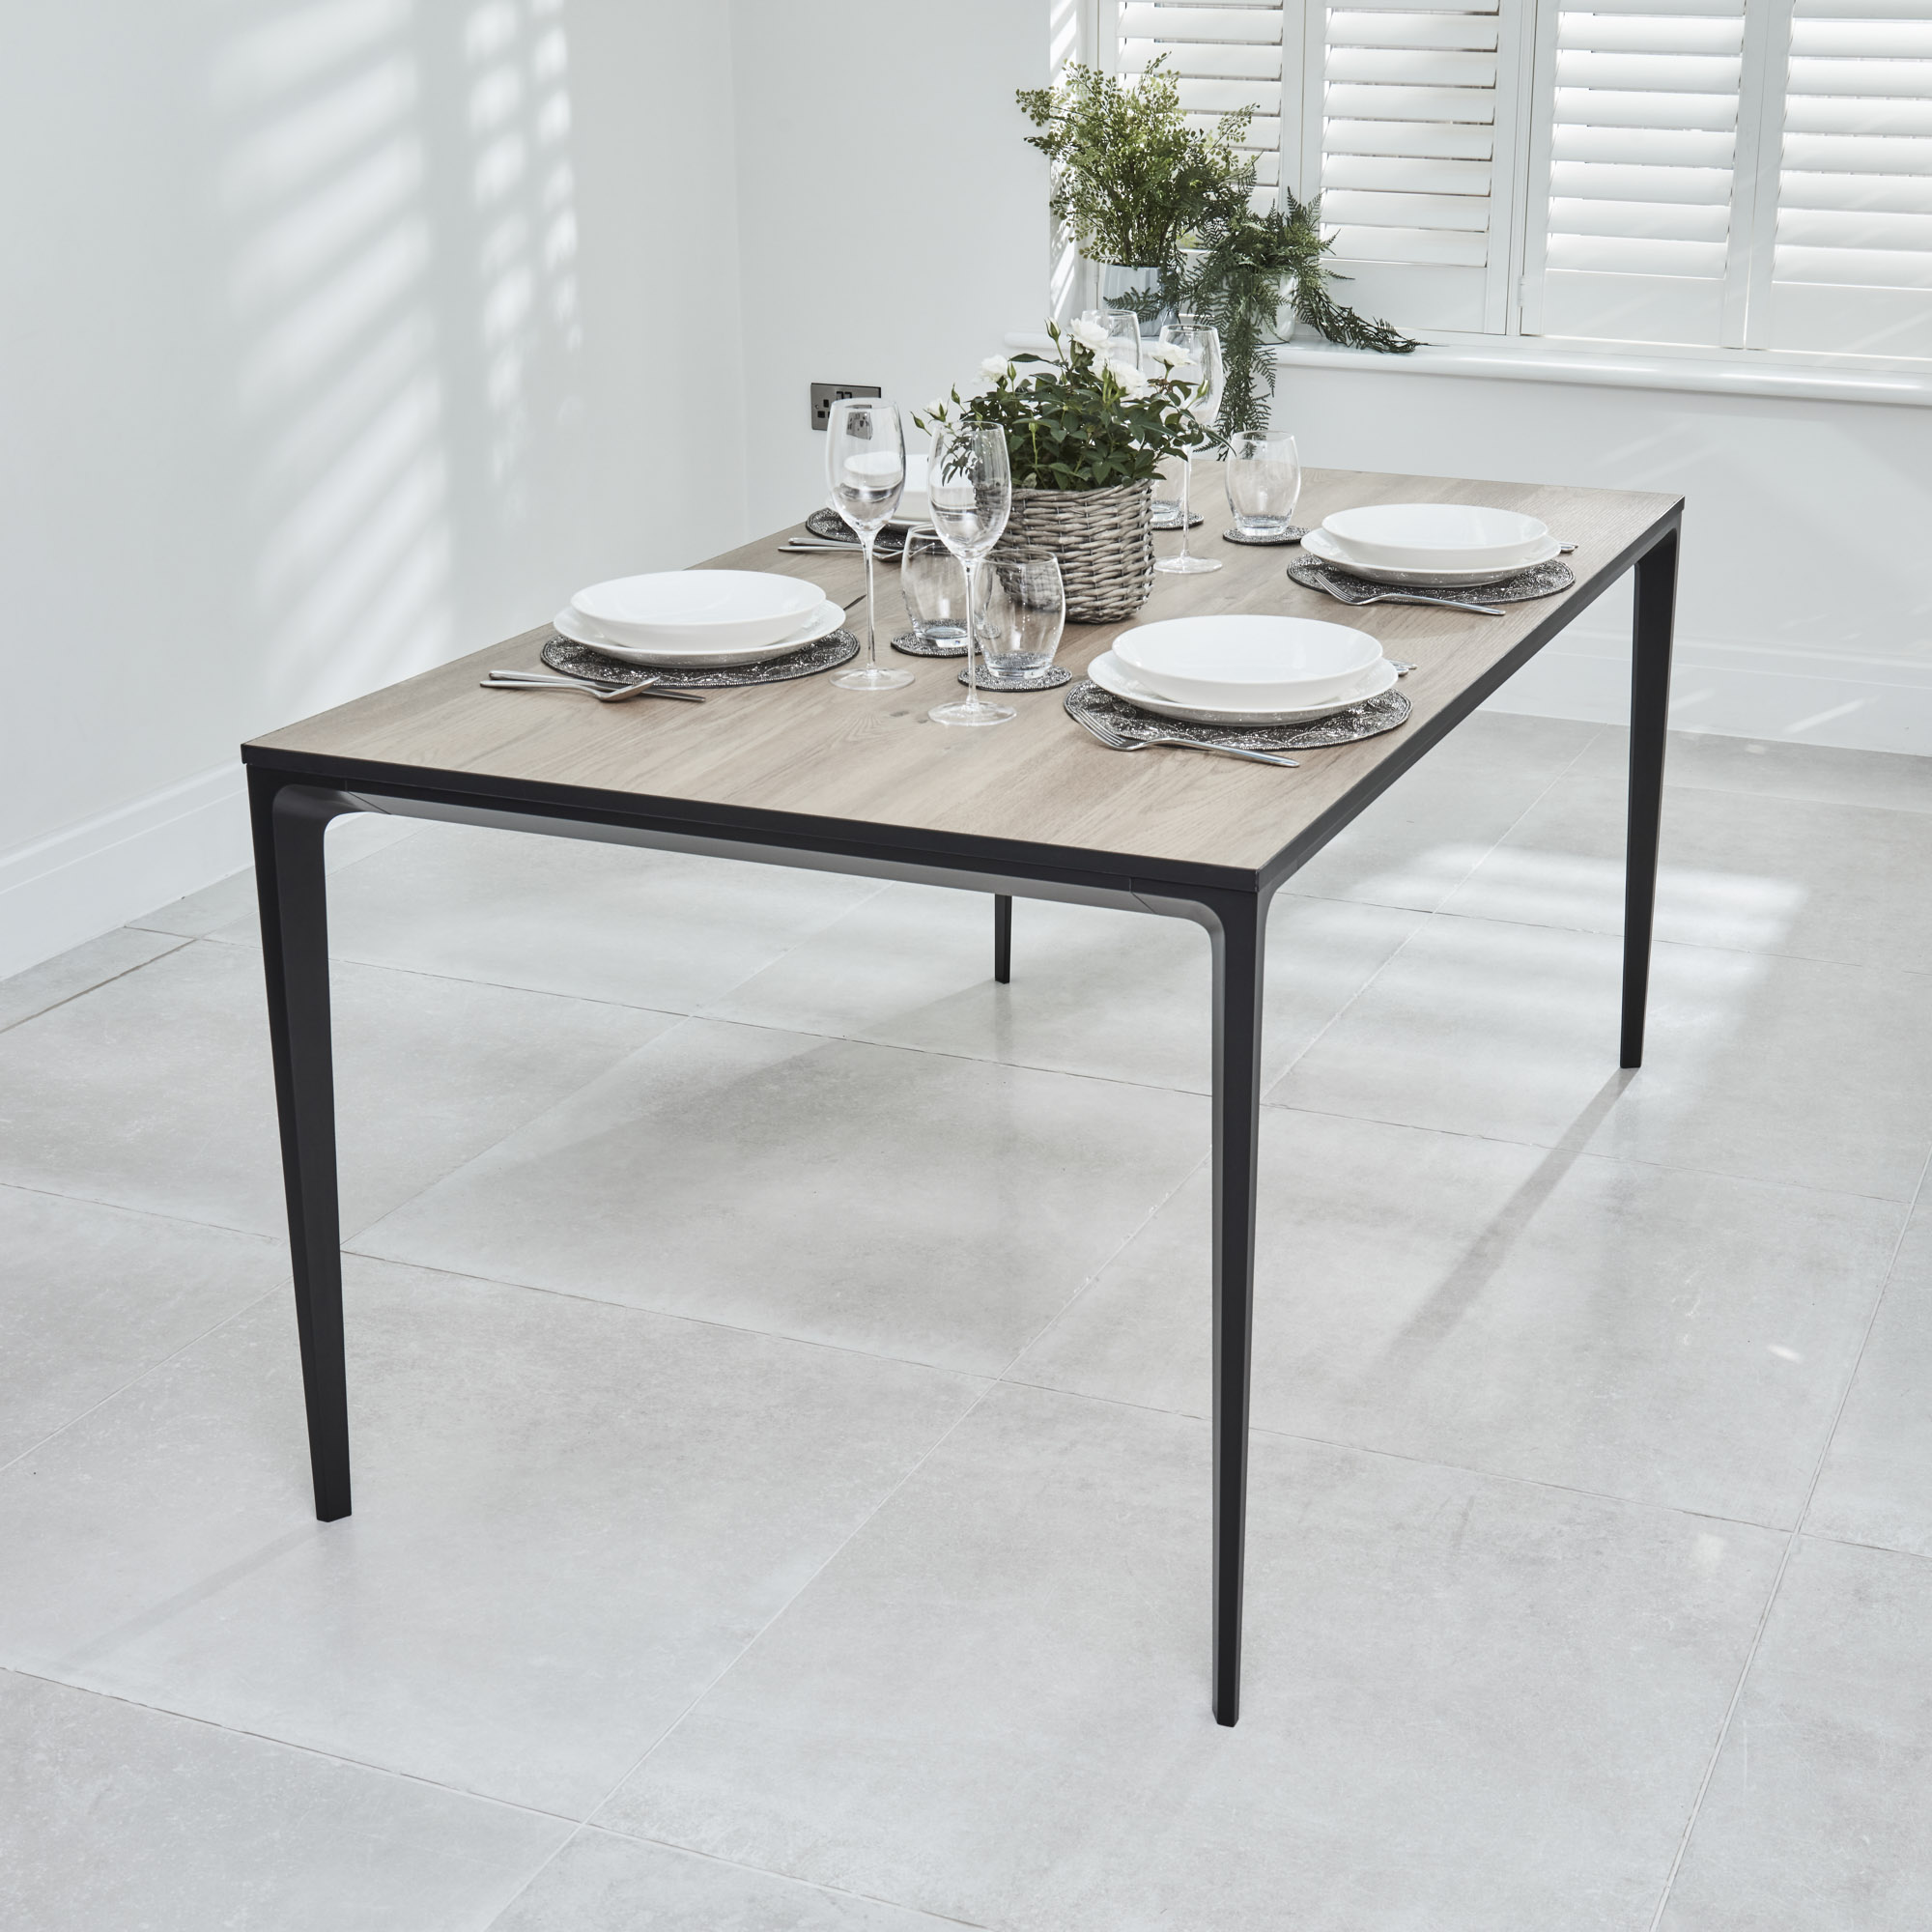 Bellagio 160cm Natural Oak Melamine Dining Table with Black Contemporary Base